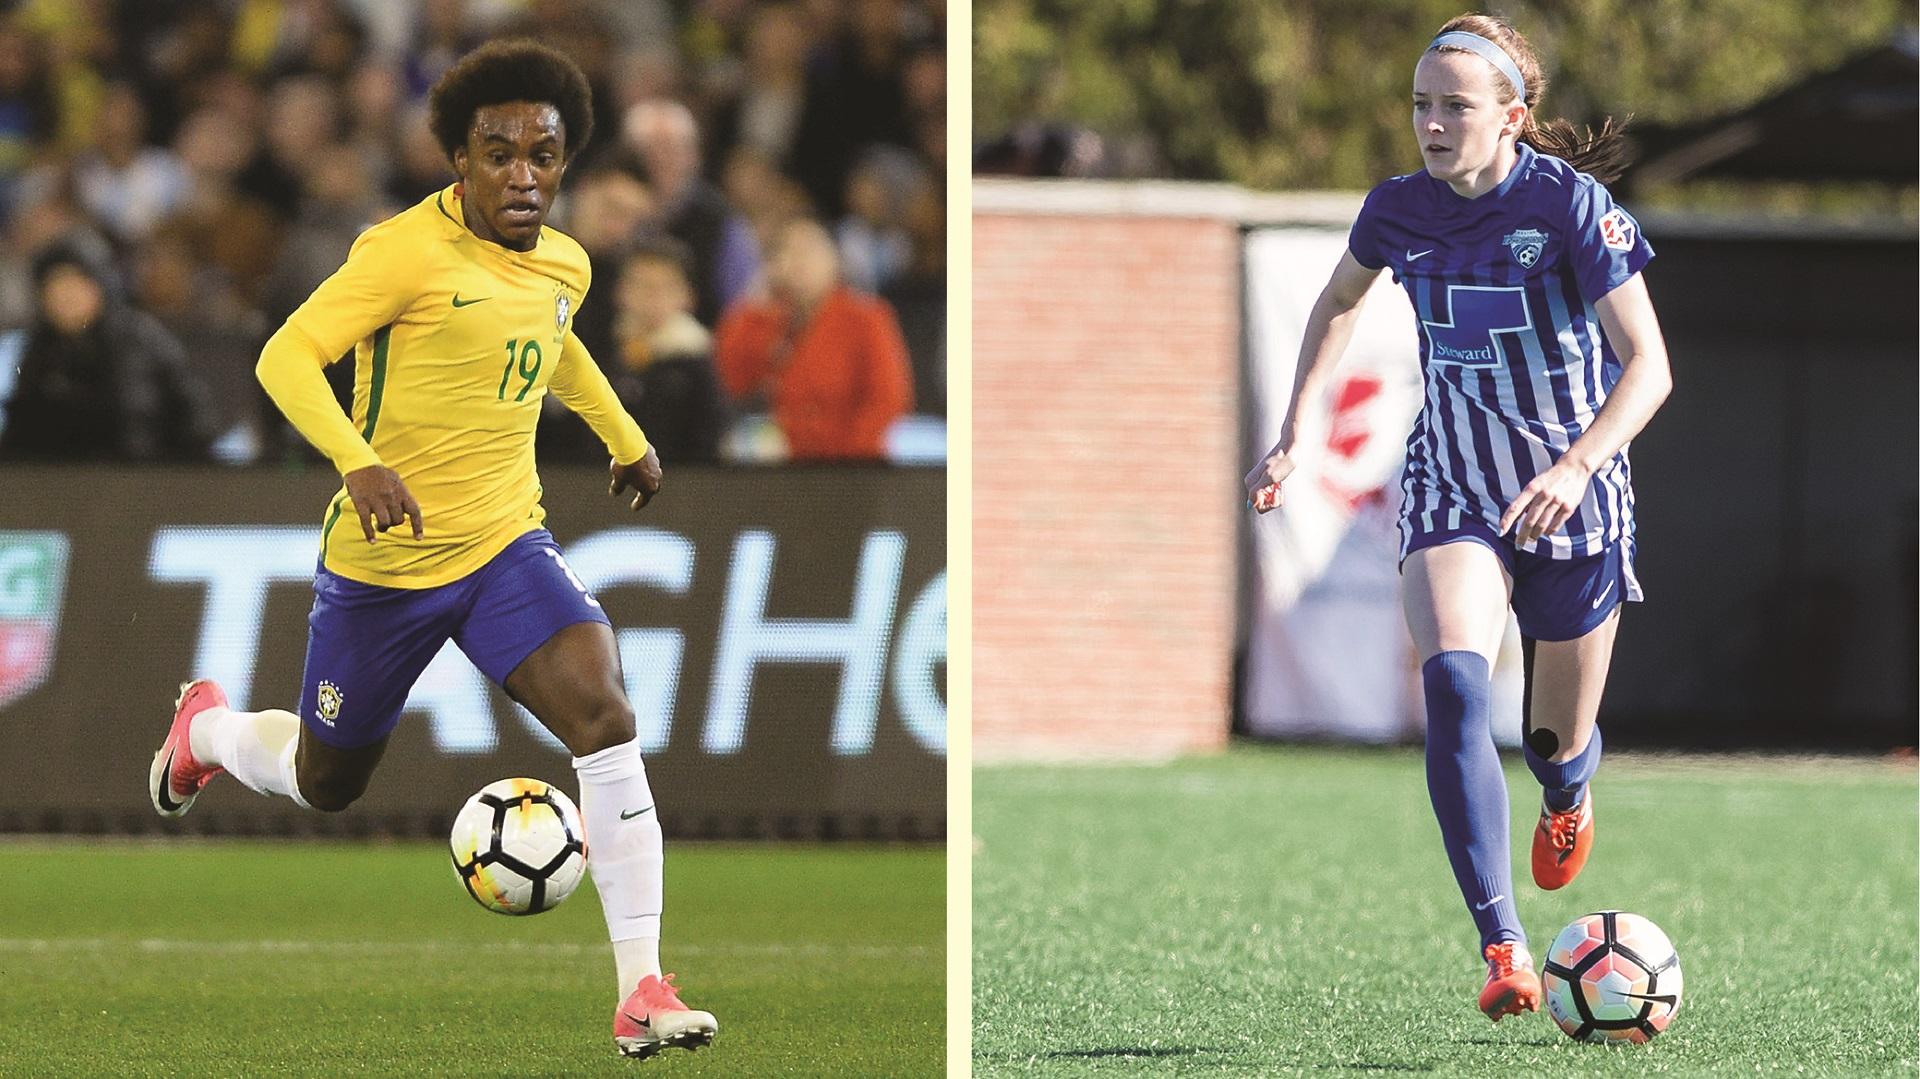 The In-Game Comparison Between Male and Female Footballers